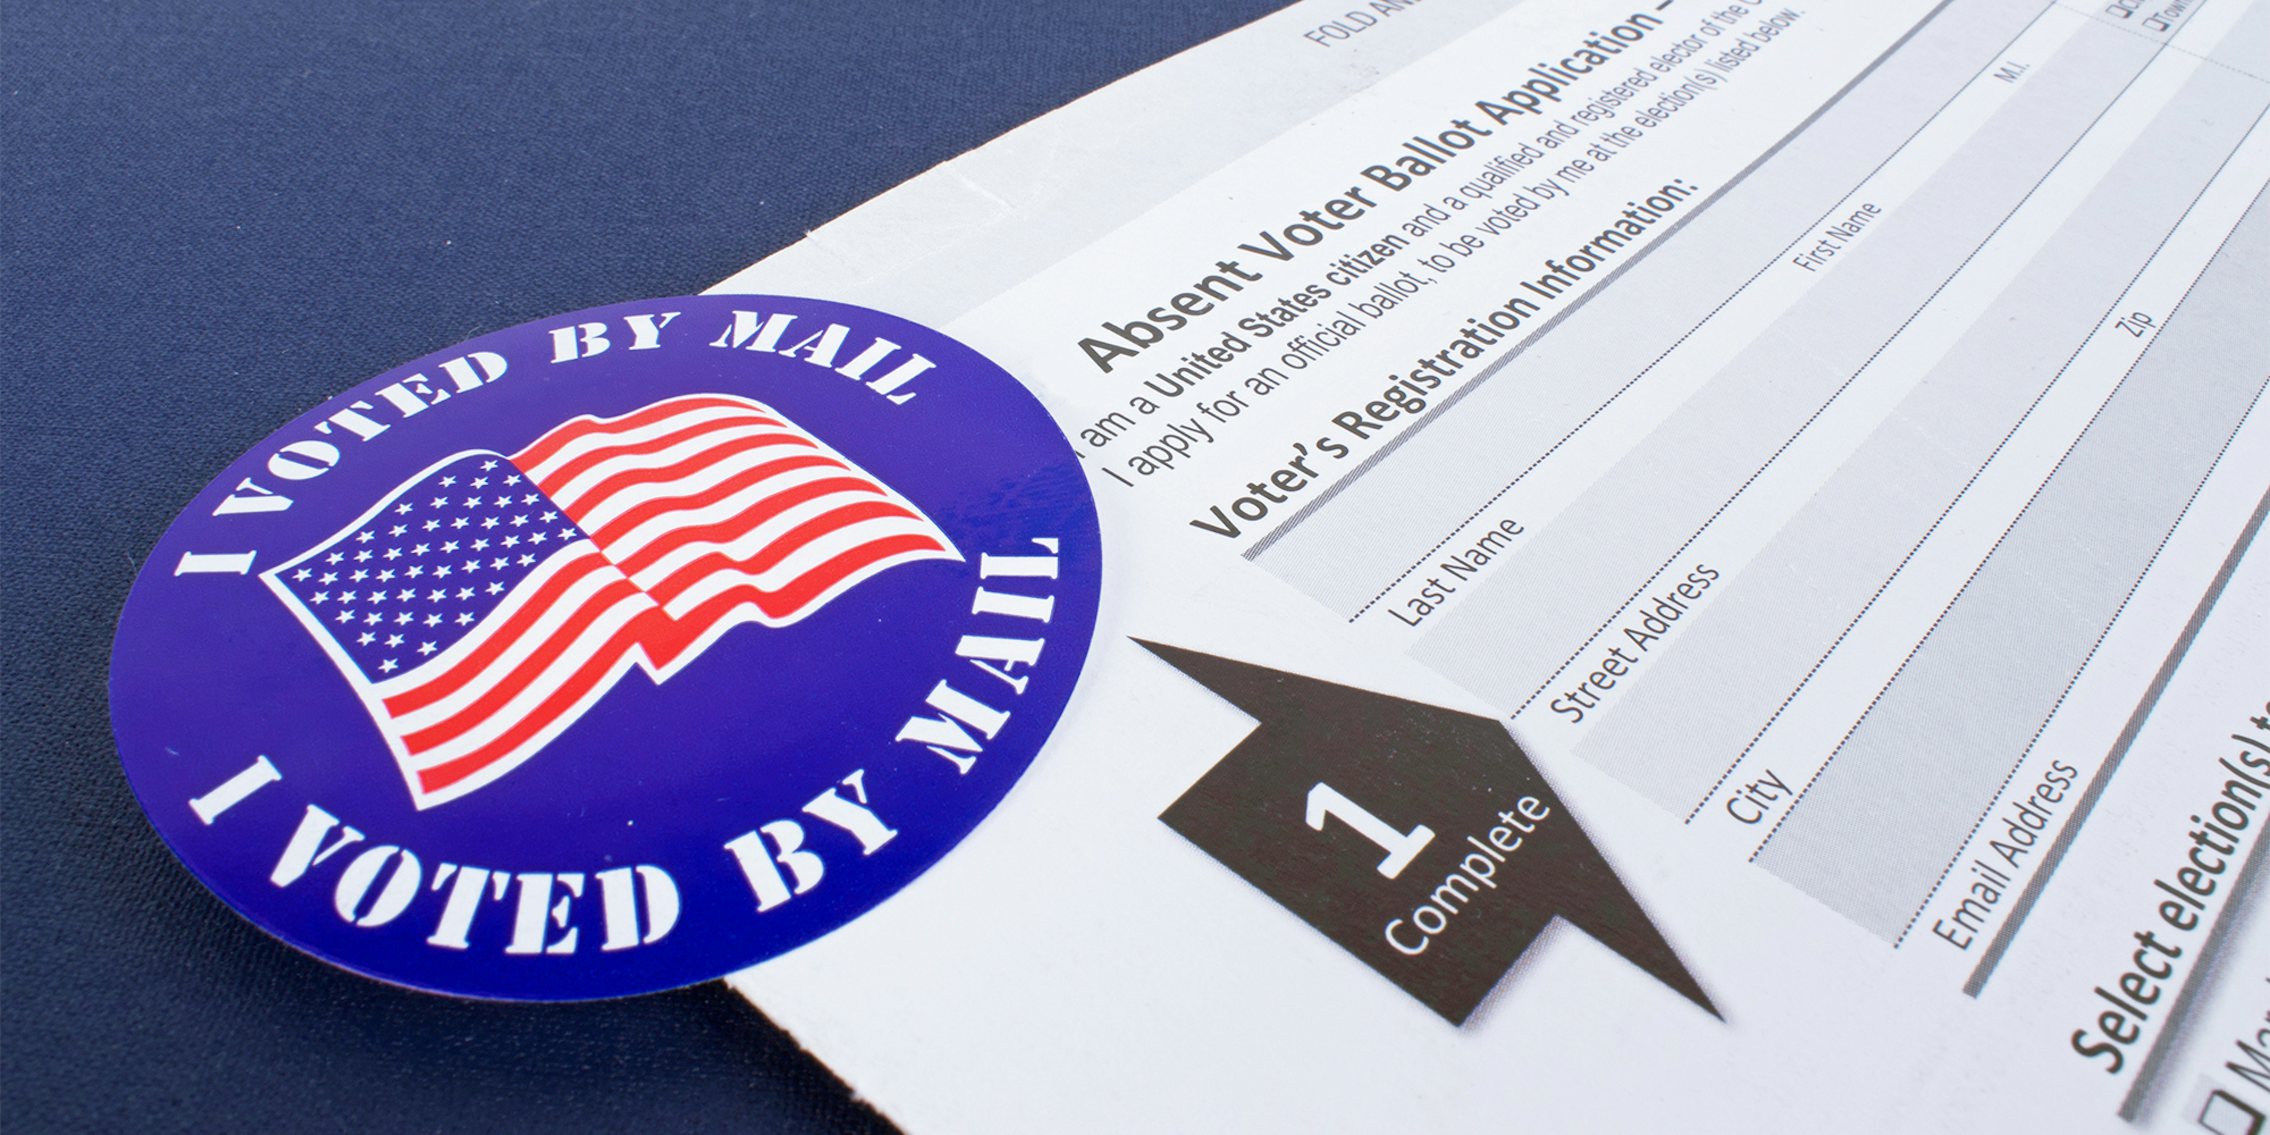 absentee ballot with 'i voted by mail' sticker